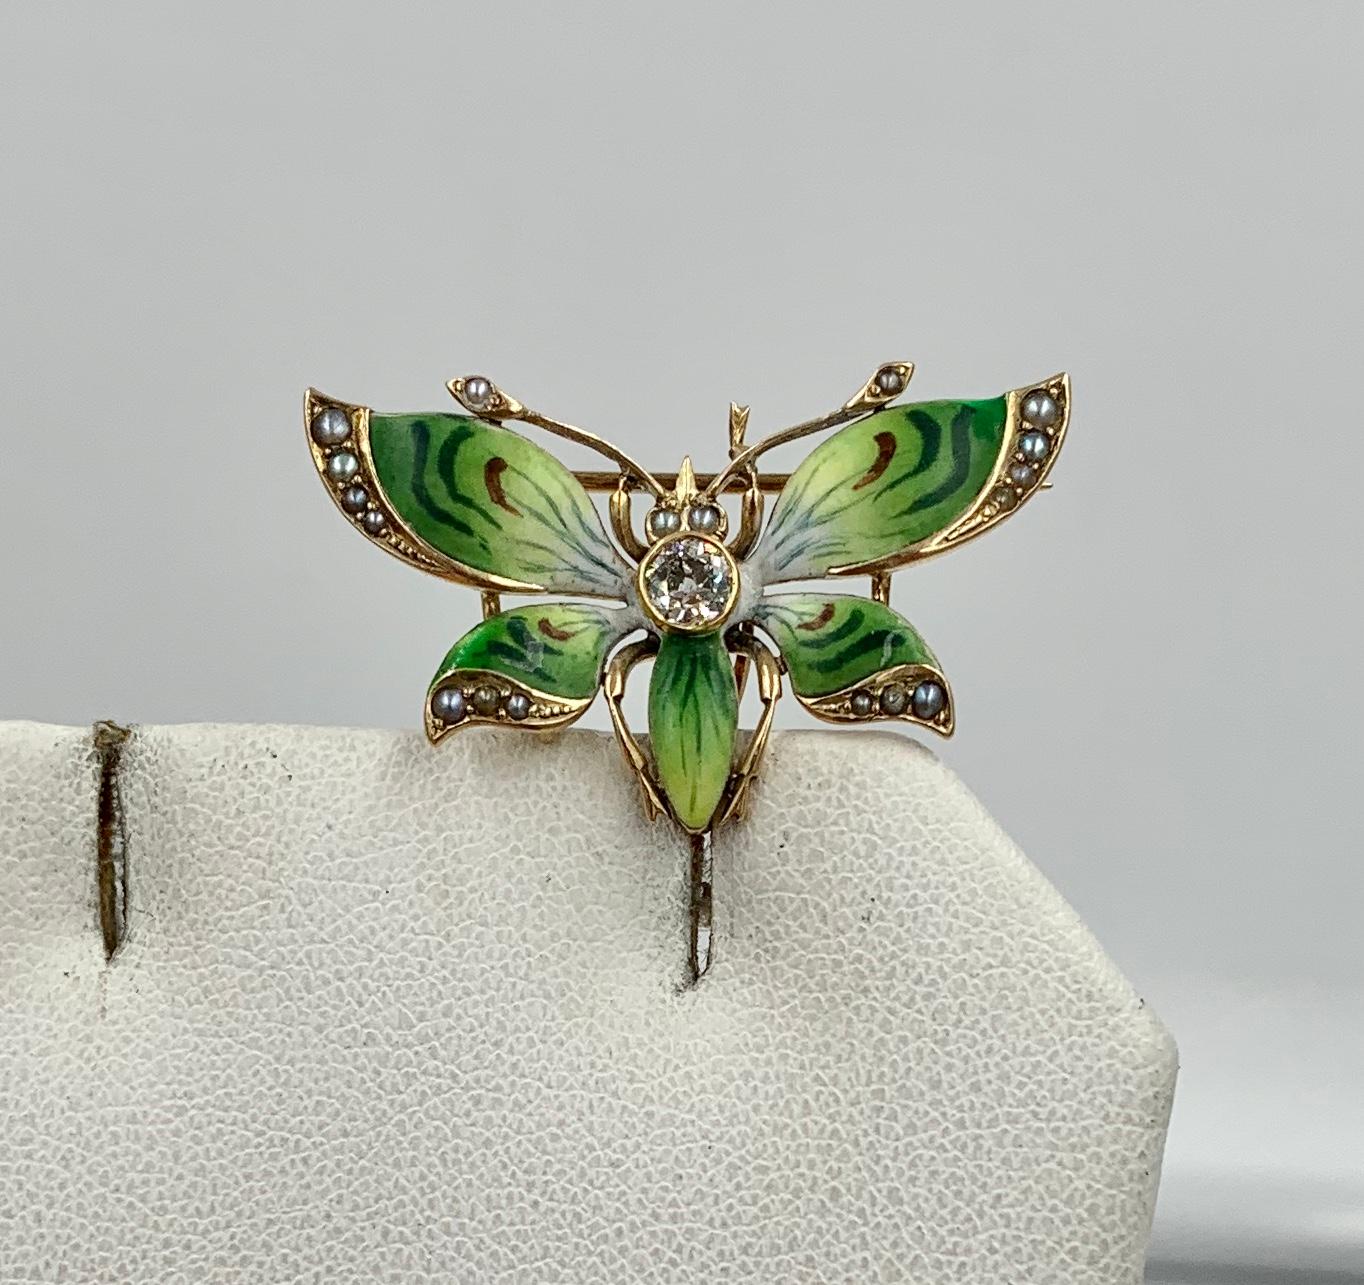 A wonderful and rare early Art Nouveau Brooch Pendant in the form of a Butterfly.  The magnificent Butterfly is 14 Karat Gold. 
It is set with a central gorgeous Old Mine Cut Diamond of approximately .20 Carats.  The diamond is just stunning -  with